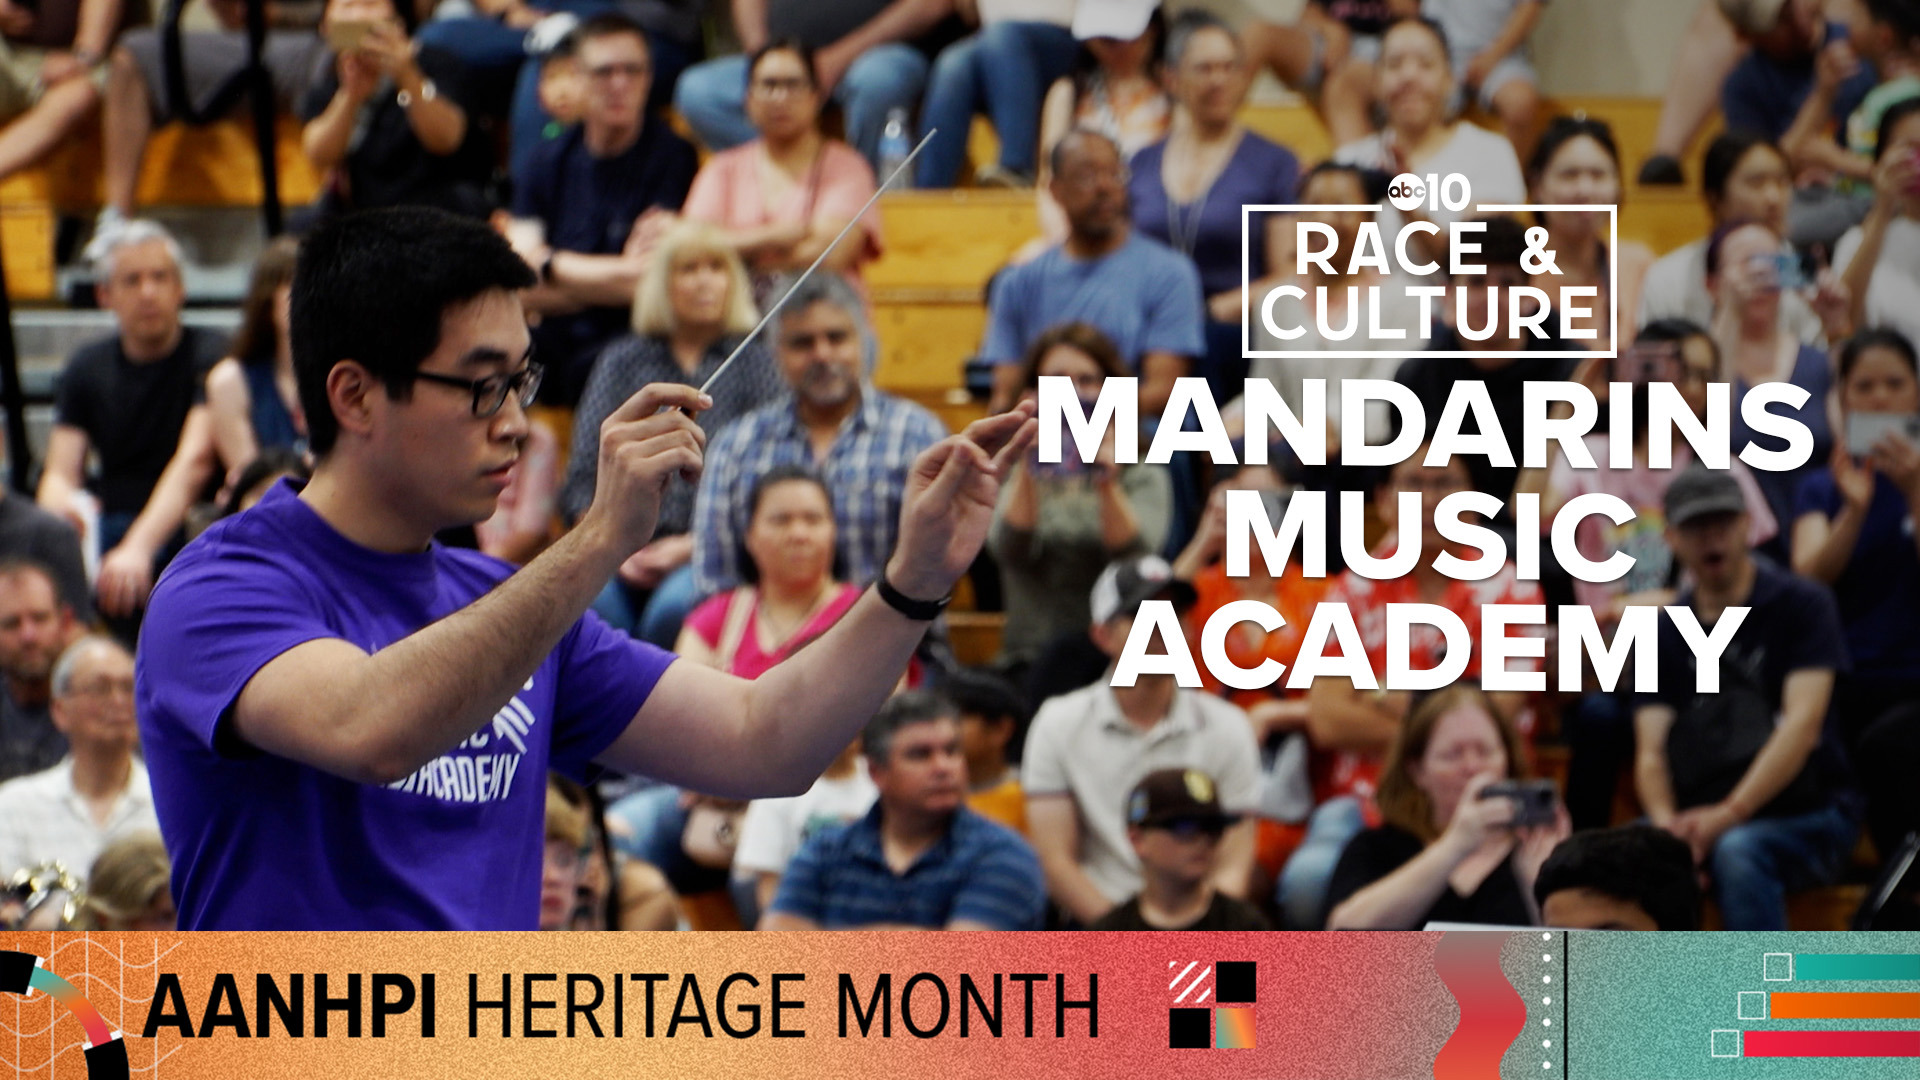 Best known as a drum and bugle corps, the Mandarins bring an innovative music program to 1,300 students in 45 schools, including instruments and instruction.